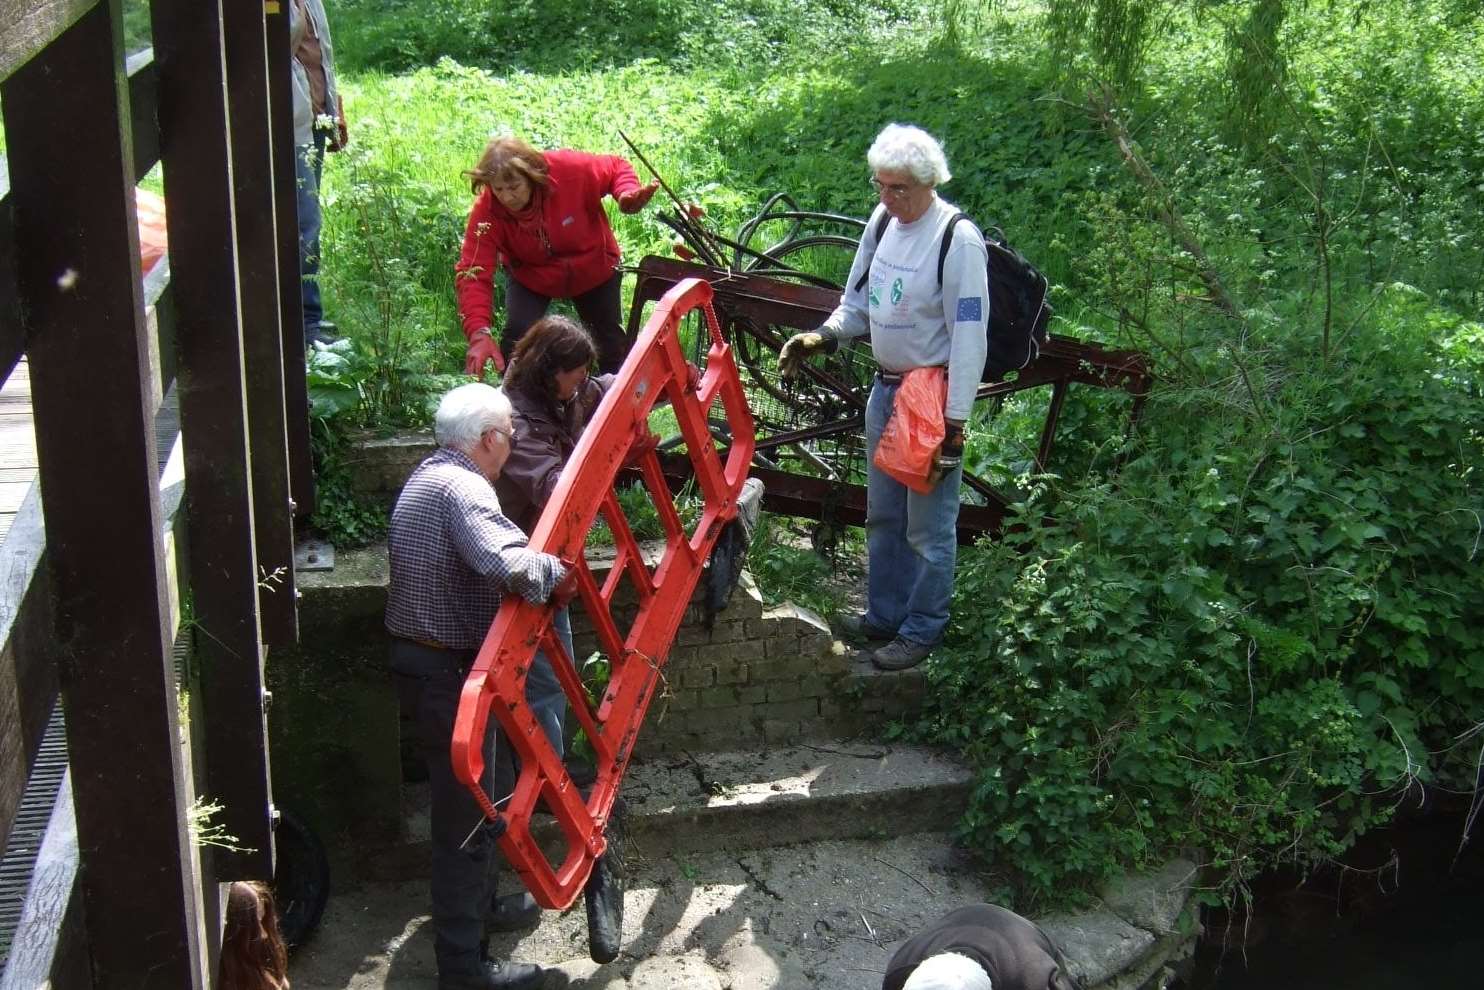 Volunteers removing rubbish from the Stour